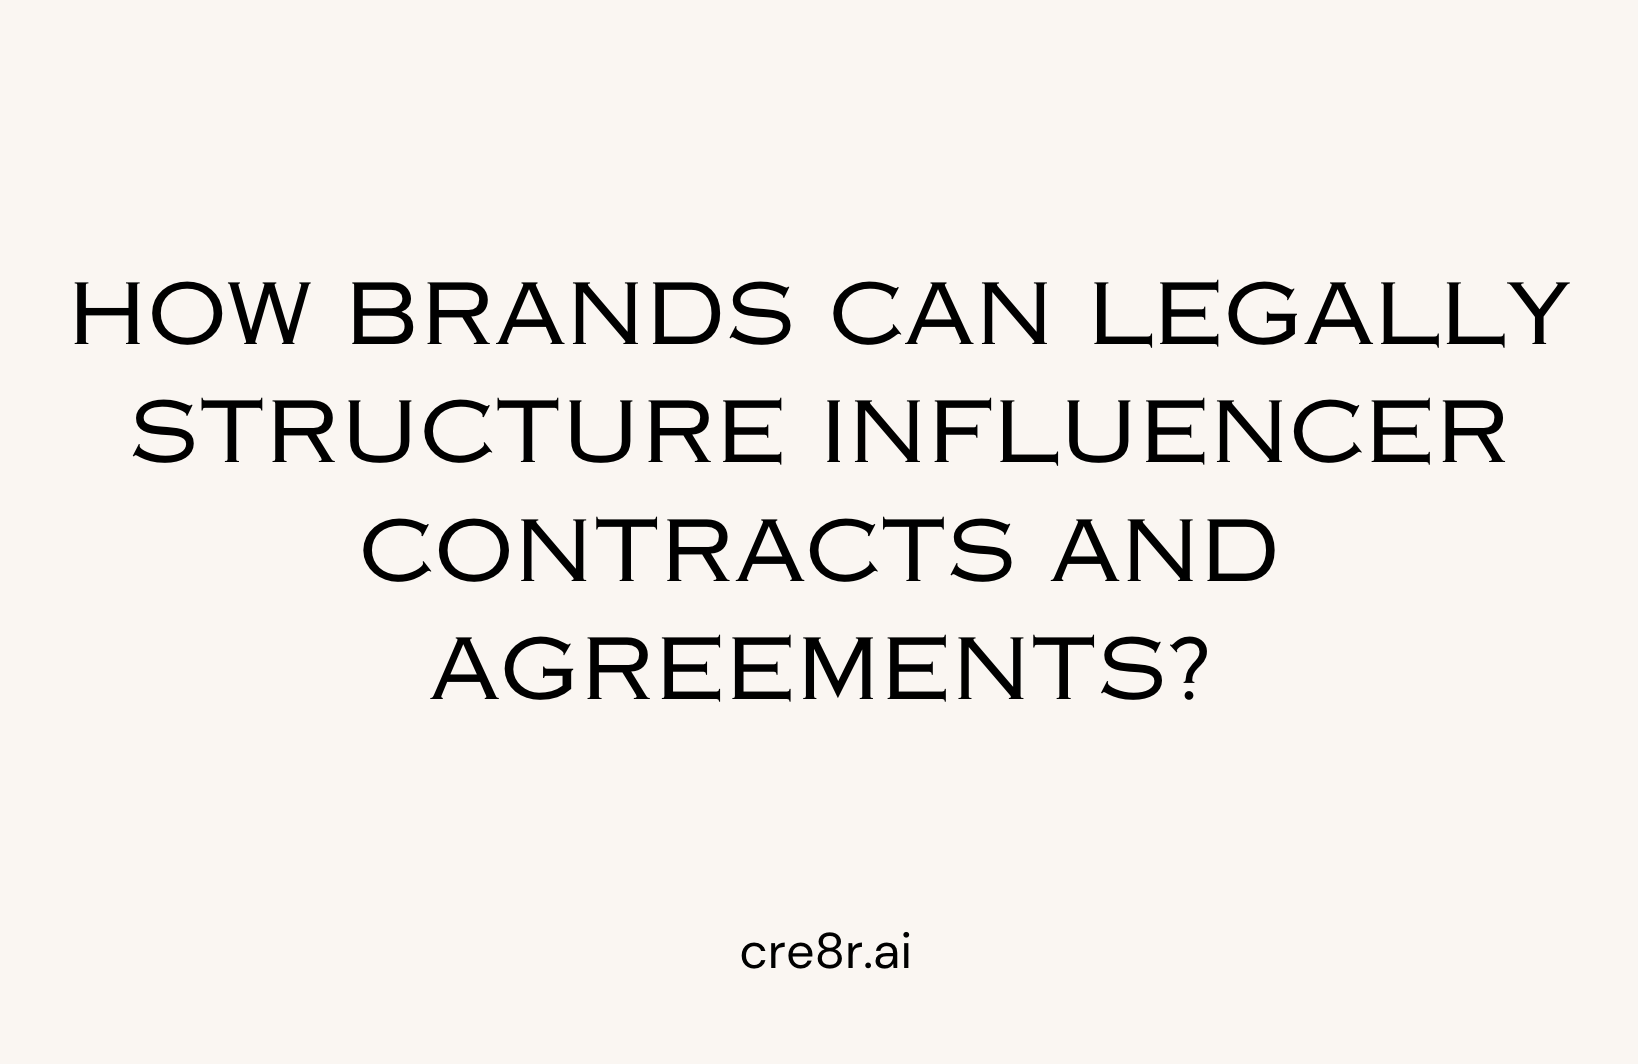 How Brands Can Legally Structure Influencer Contracts and Agreements?